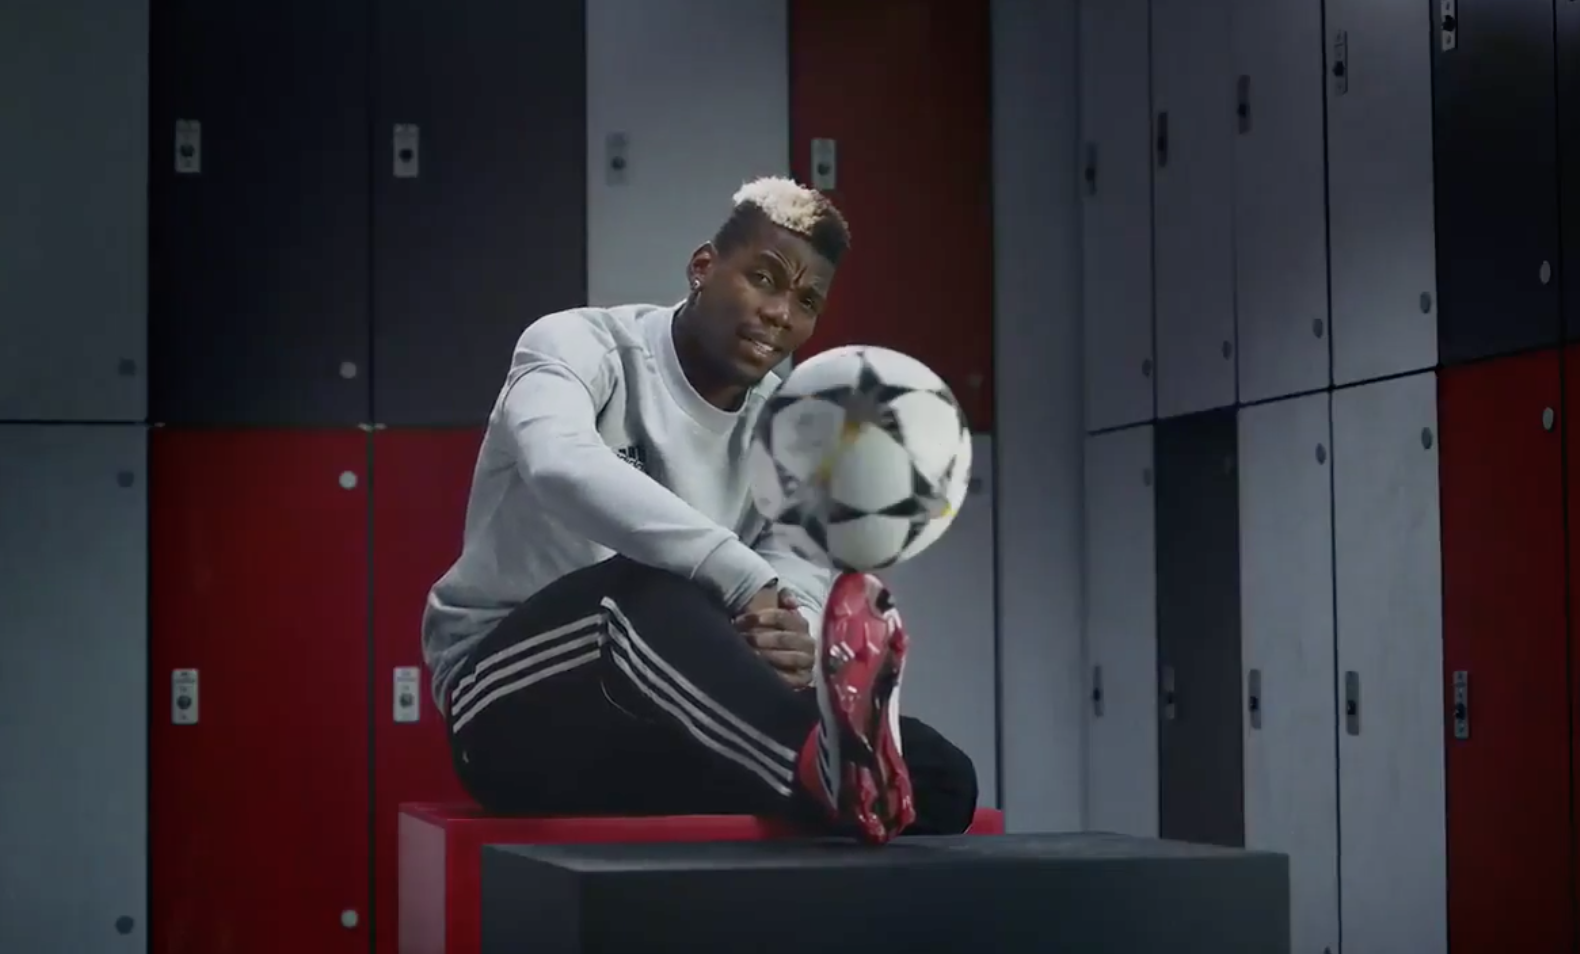 Paul Pogba's debut as director (of a commercial)